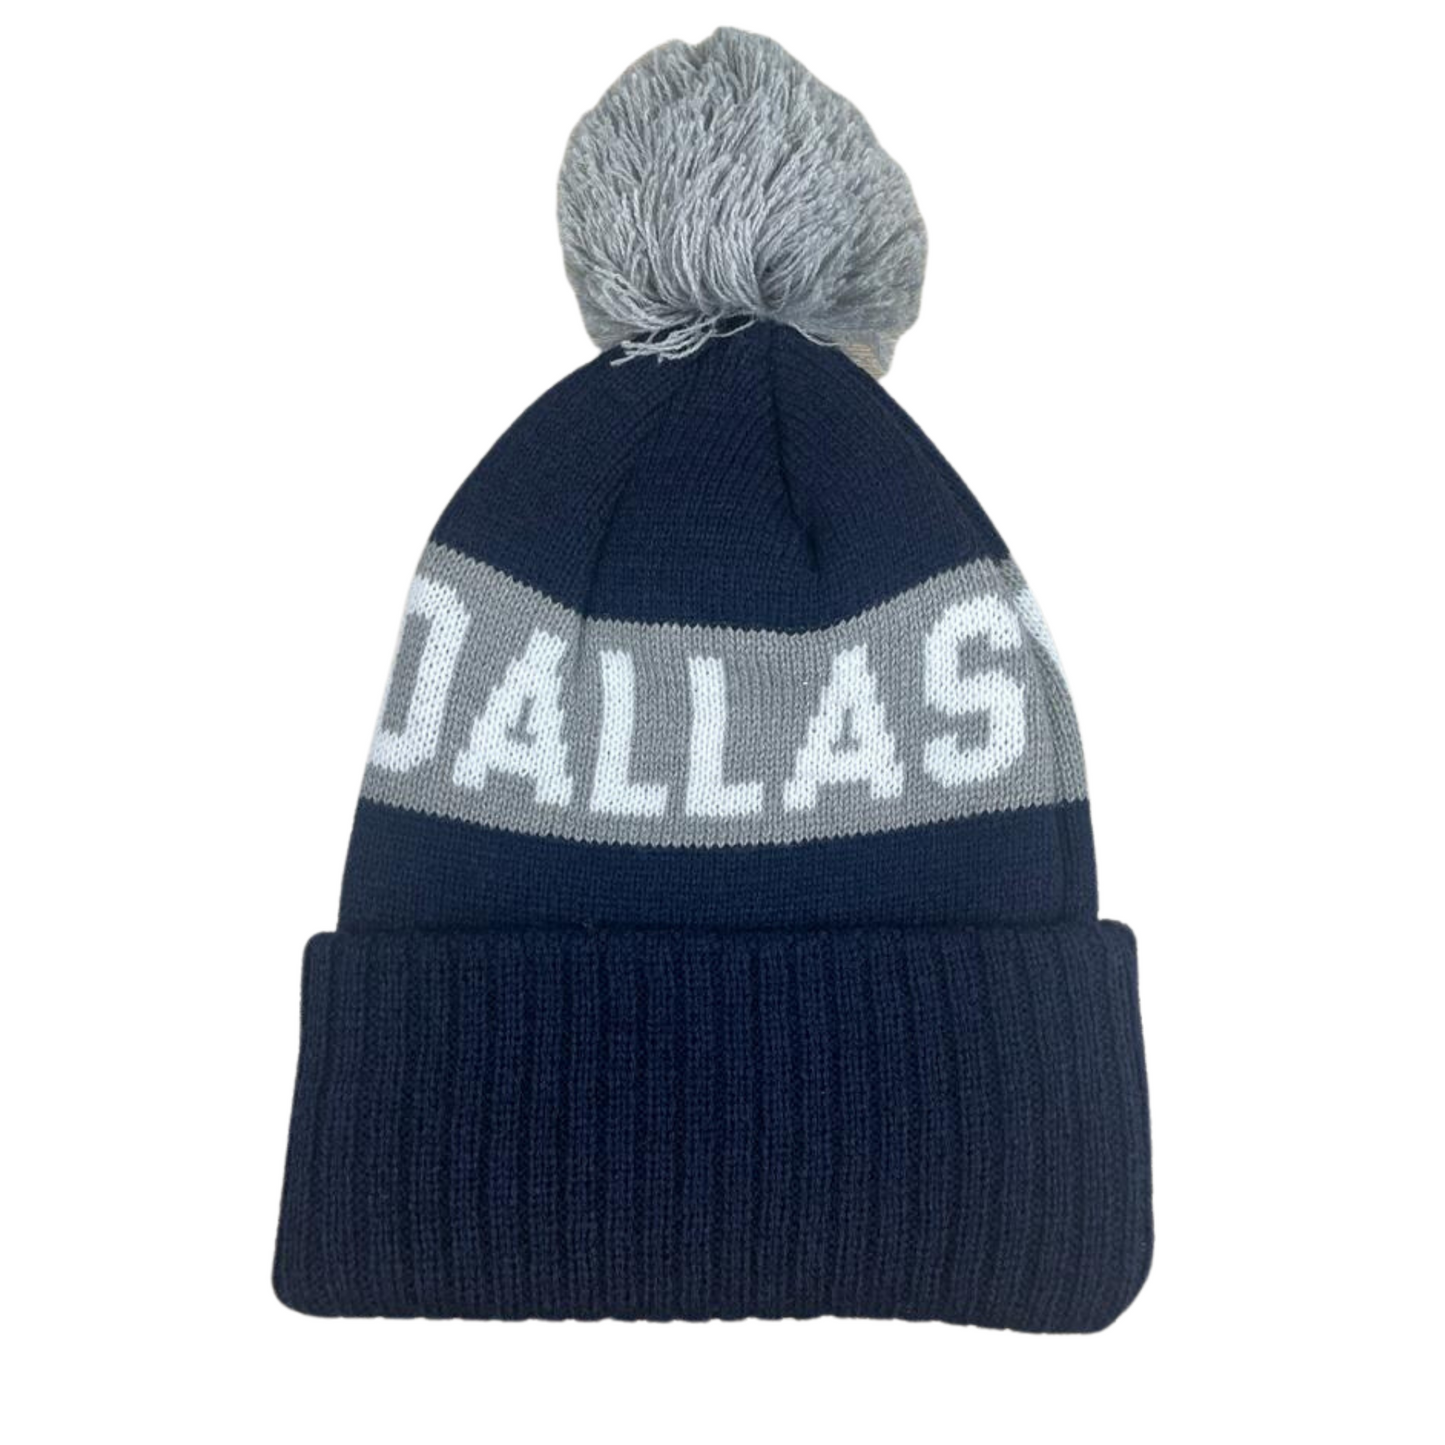 Dallas Winter Football Beanie - Stay Warm & Cheer for Your Team in Style!